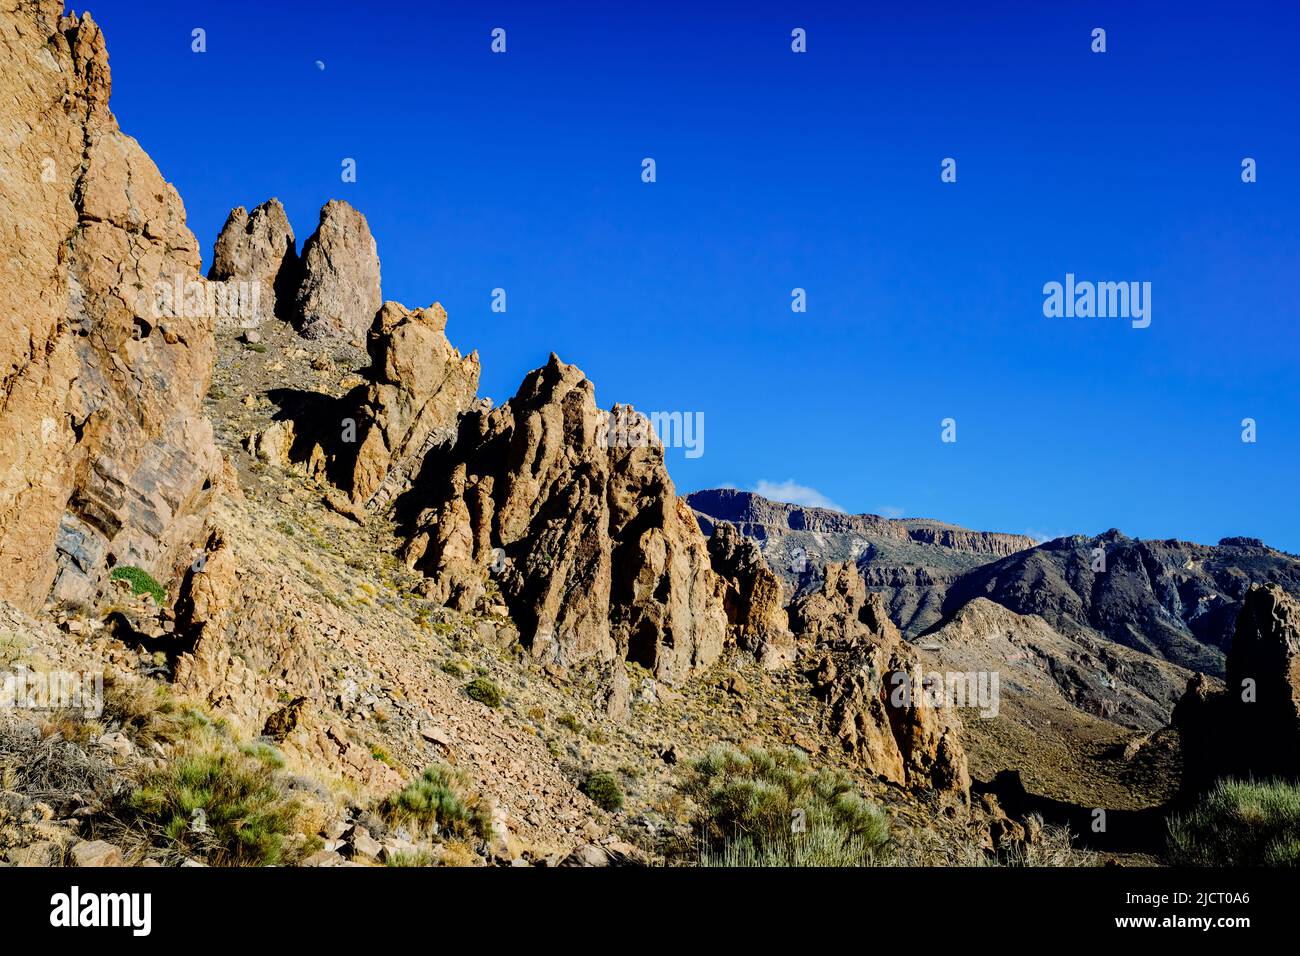 Panoramic landscape in Roques de Garcia, Tenerife, spectacular volcanic rock formations. Stock Photo